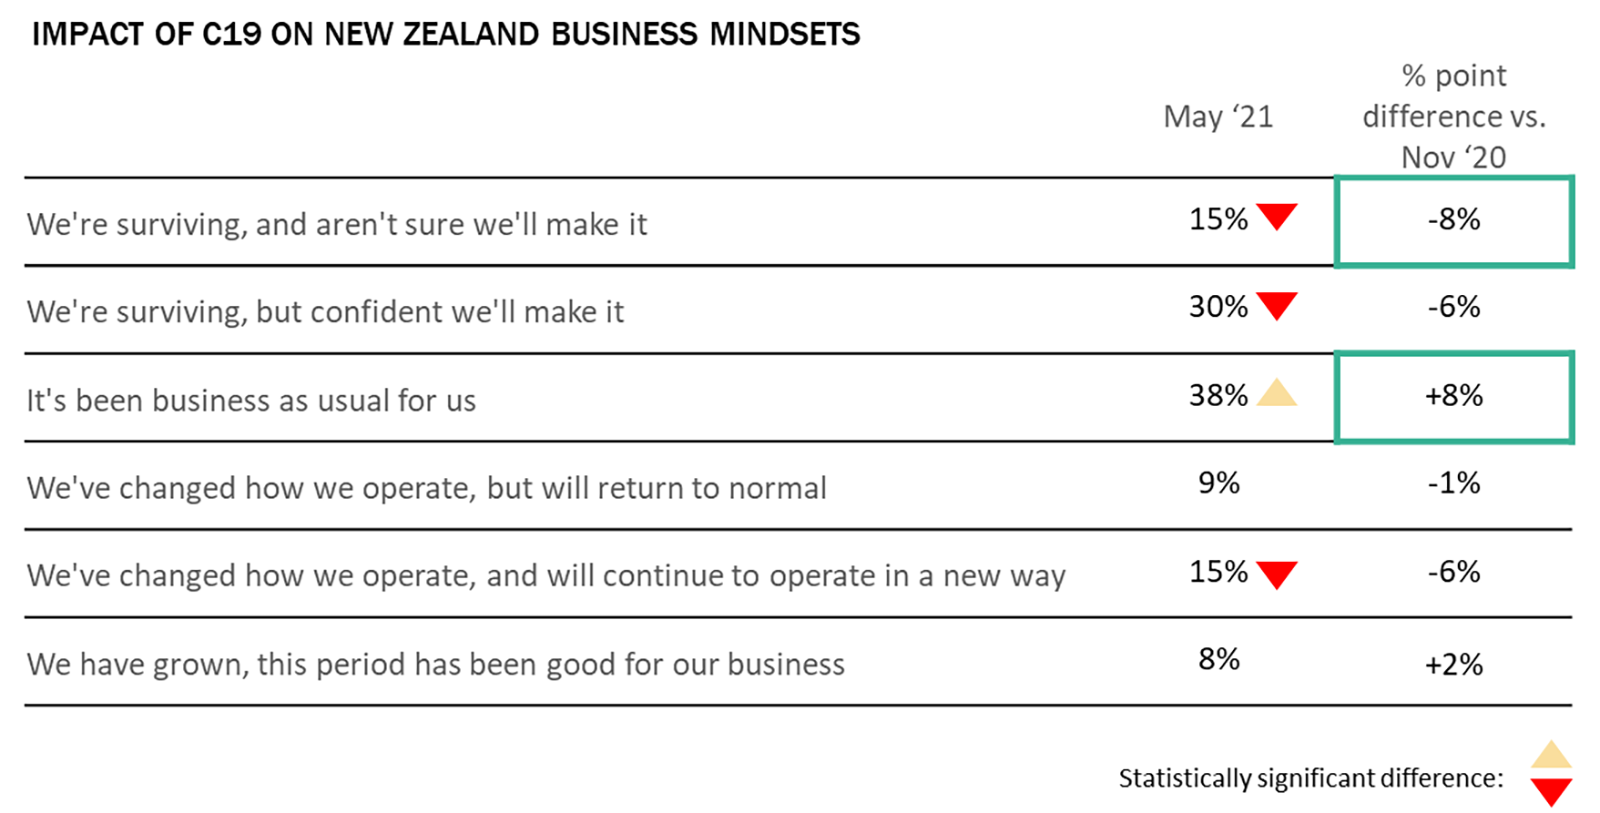 The impact of covid-19 on New Zealand business - May 2021. 